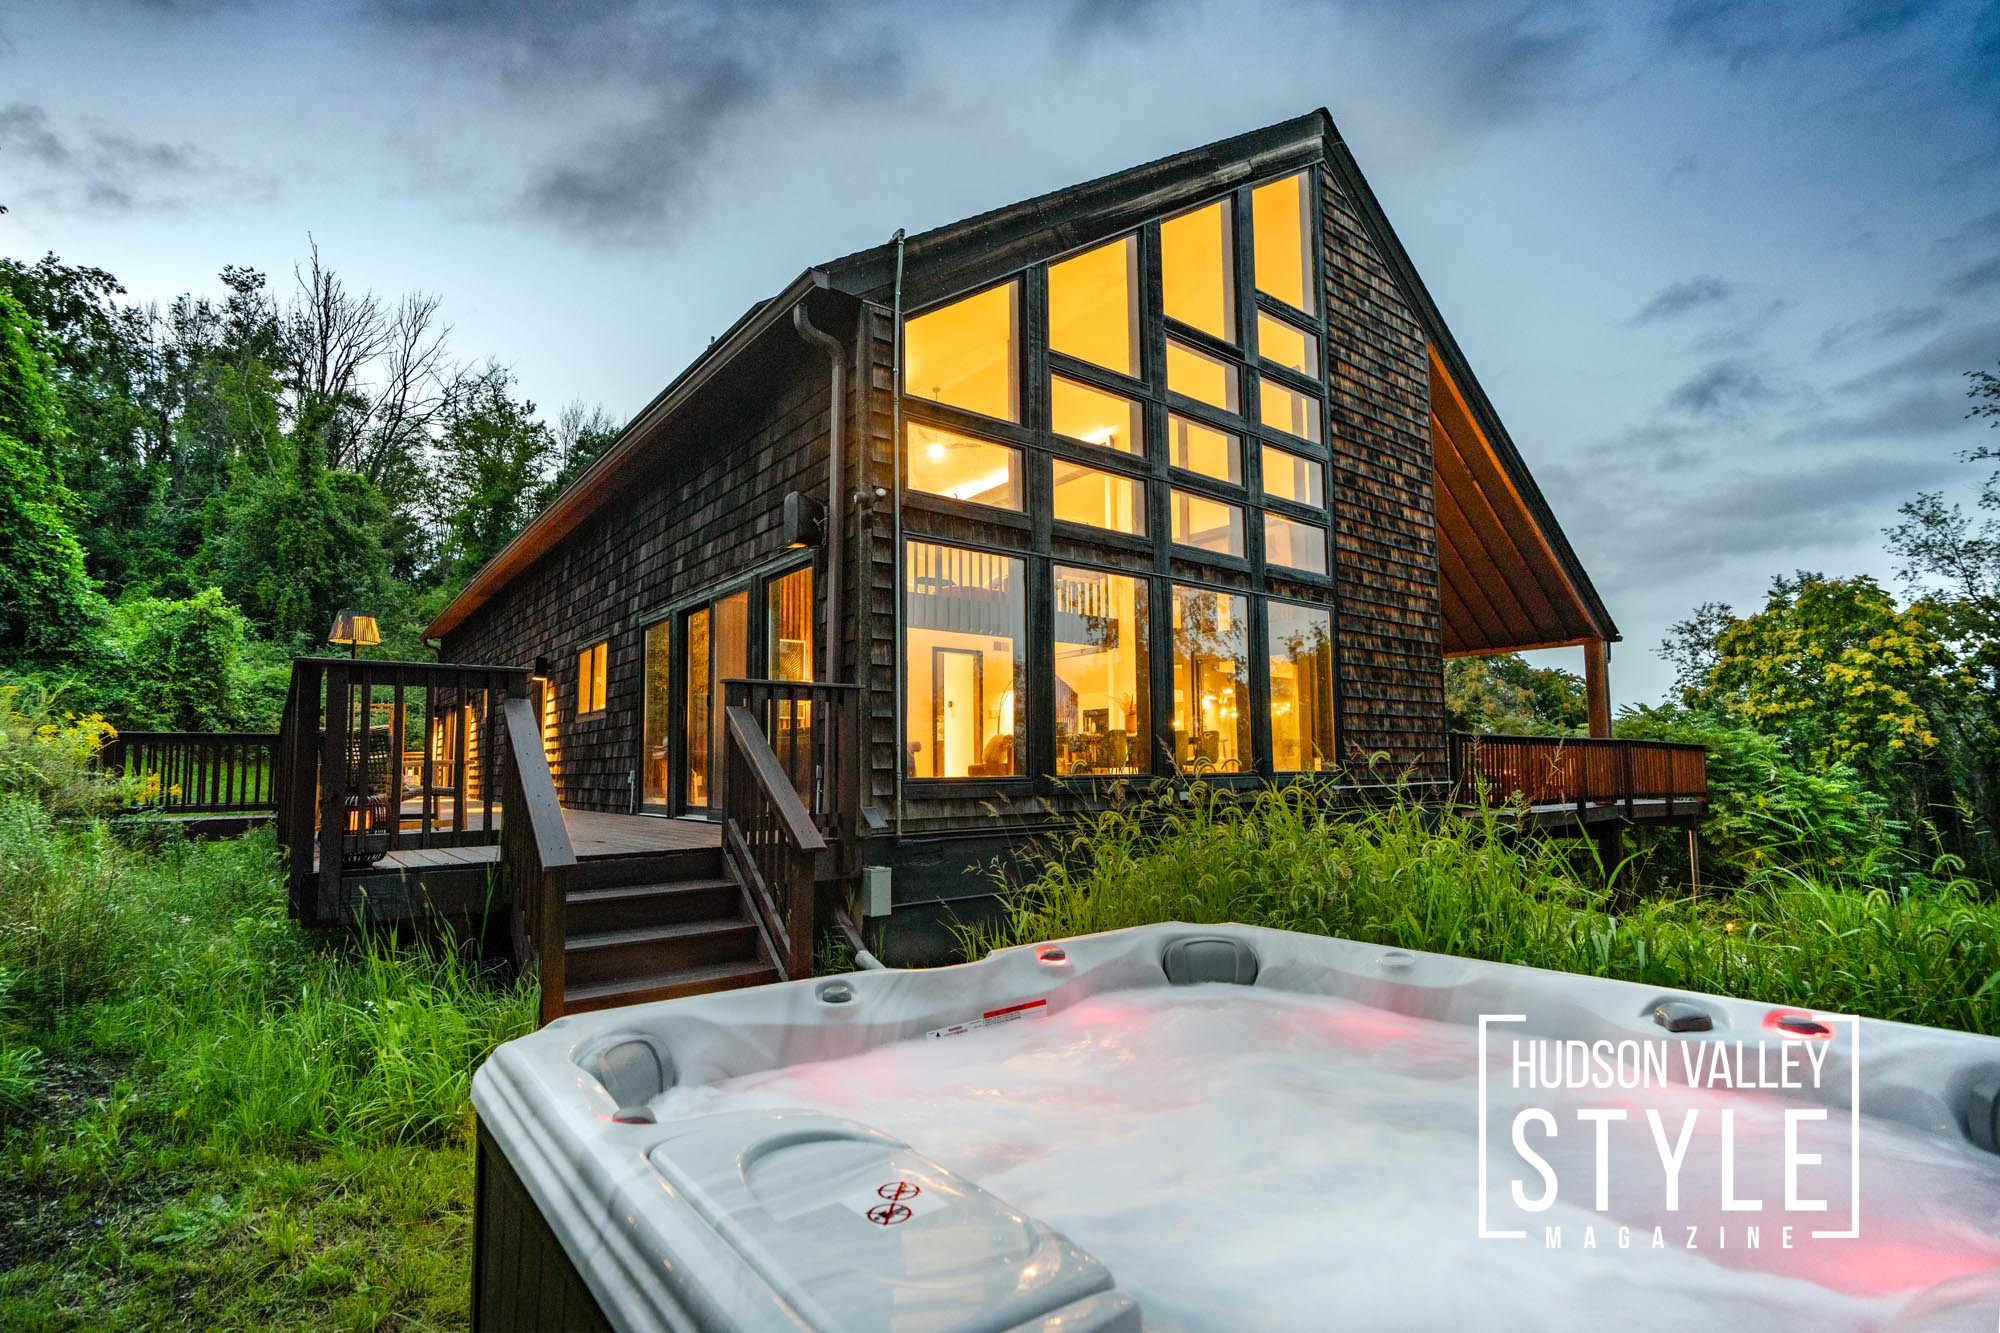 Warwick's Twilight Serenade: The Luminous Dance of a Chalet and Nature – Exploring Hudson Valley with Photographer Maxwell Alexander – Presented by ALLUVION MEDIA – The Best Hospitality Photography in the Northeast